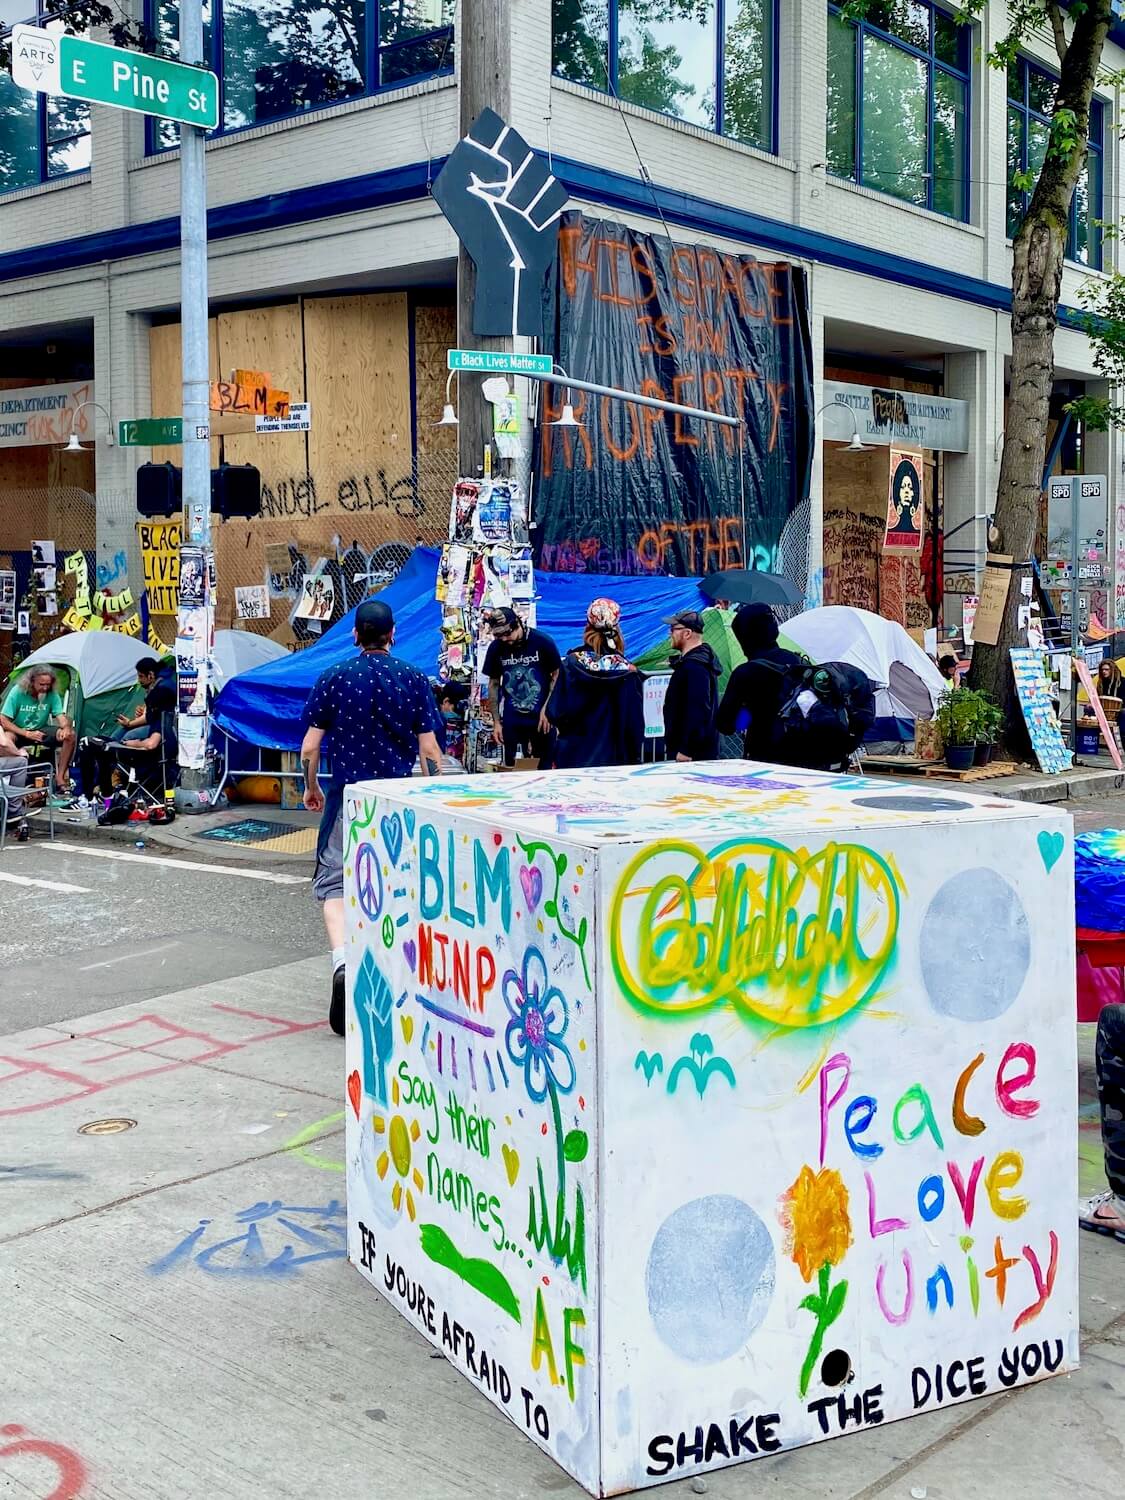 Signage at the CHOP area of Seattle during the Black Lives Matter protest. This is a square box created from plywood sitting in front of the vacant East Precinct police station. The colors of the box are white background with hints of light green and blue. The sign says, Peace, Love, Unity.